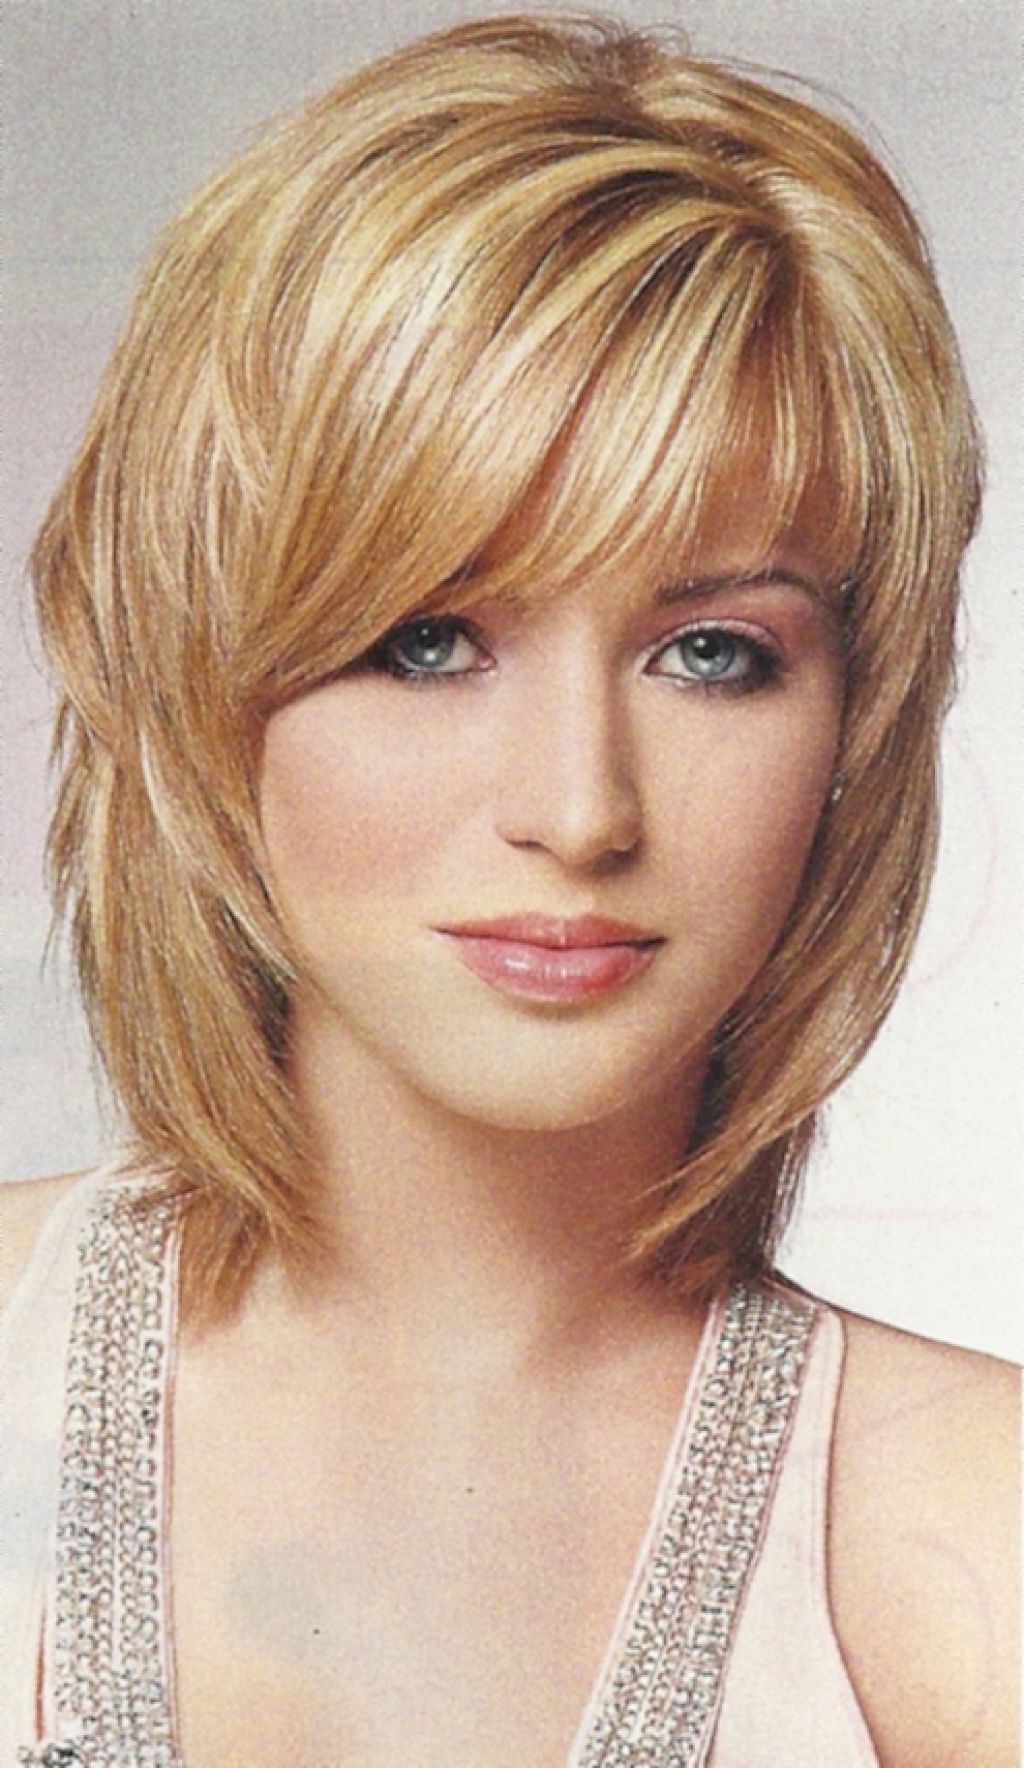 Cute Medium Short Hairstyles – Hairstyle For Women & Man With Regard To Short Medium Shaggy Hairstyles (View 17 of 25)